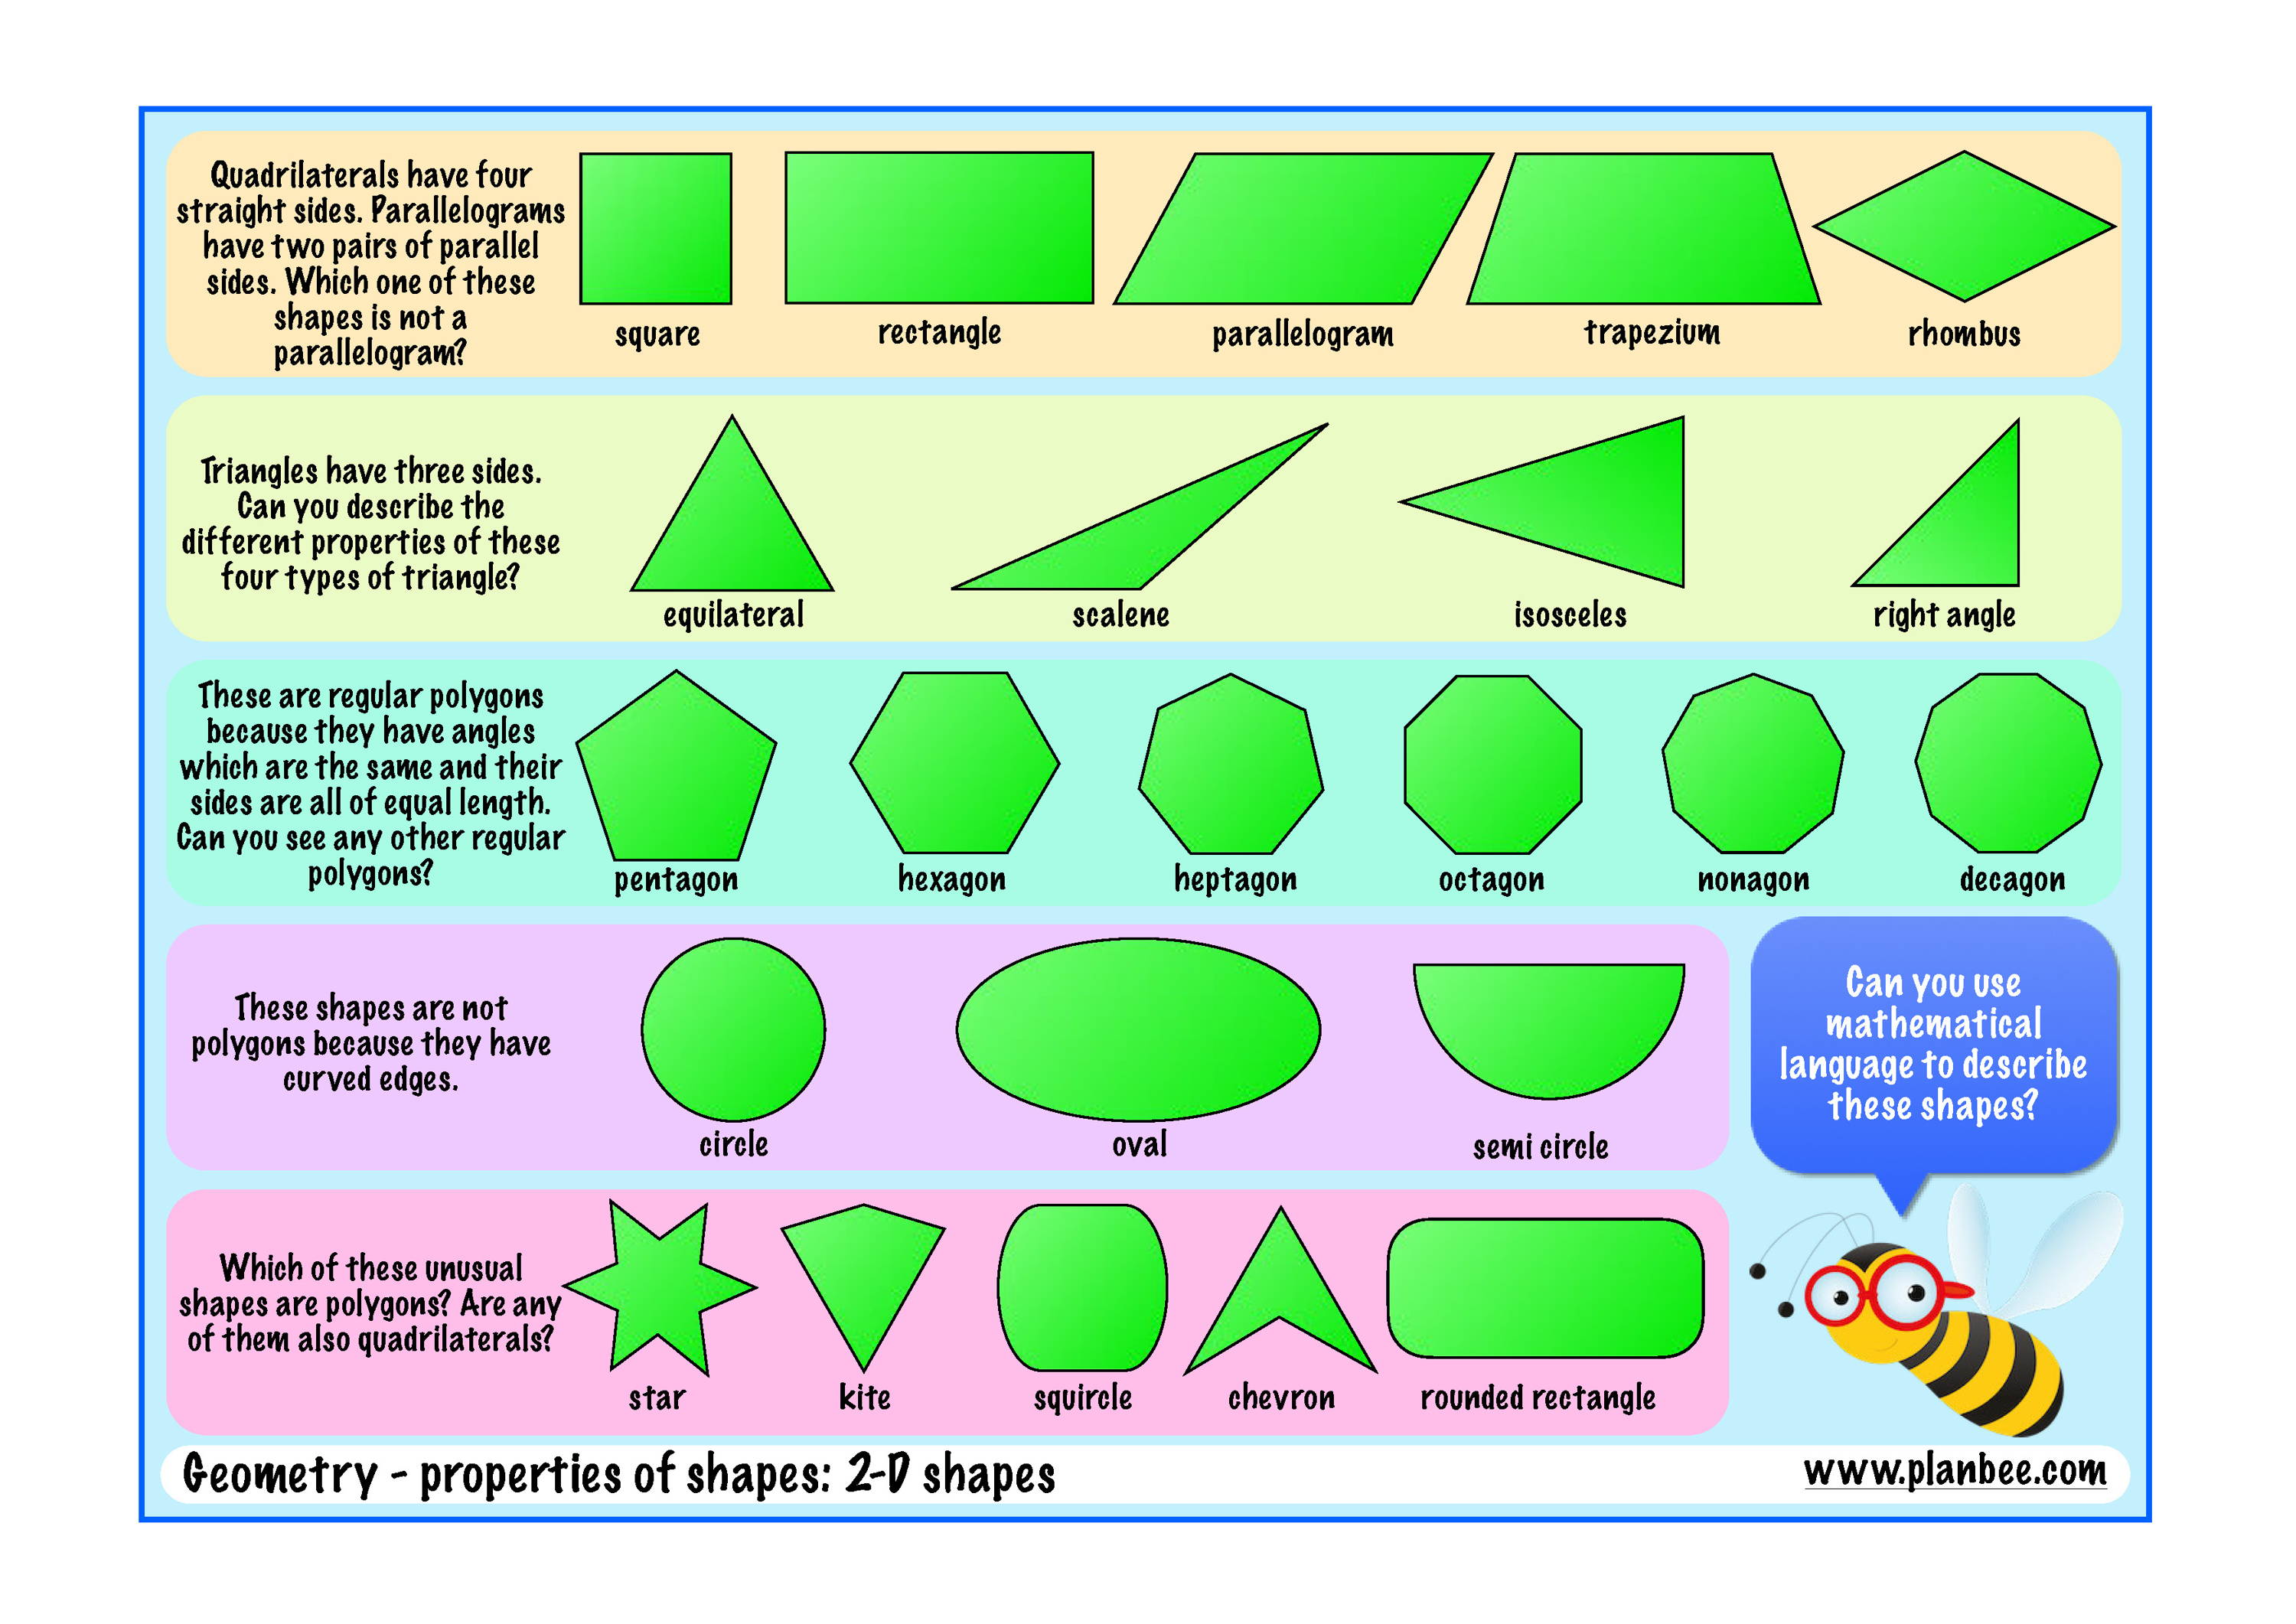 Learn the properties of 2D shapes with this free poster